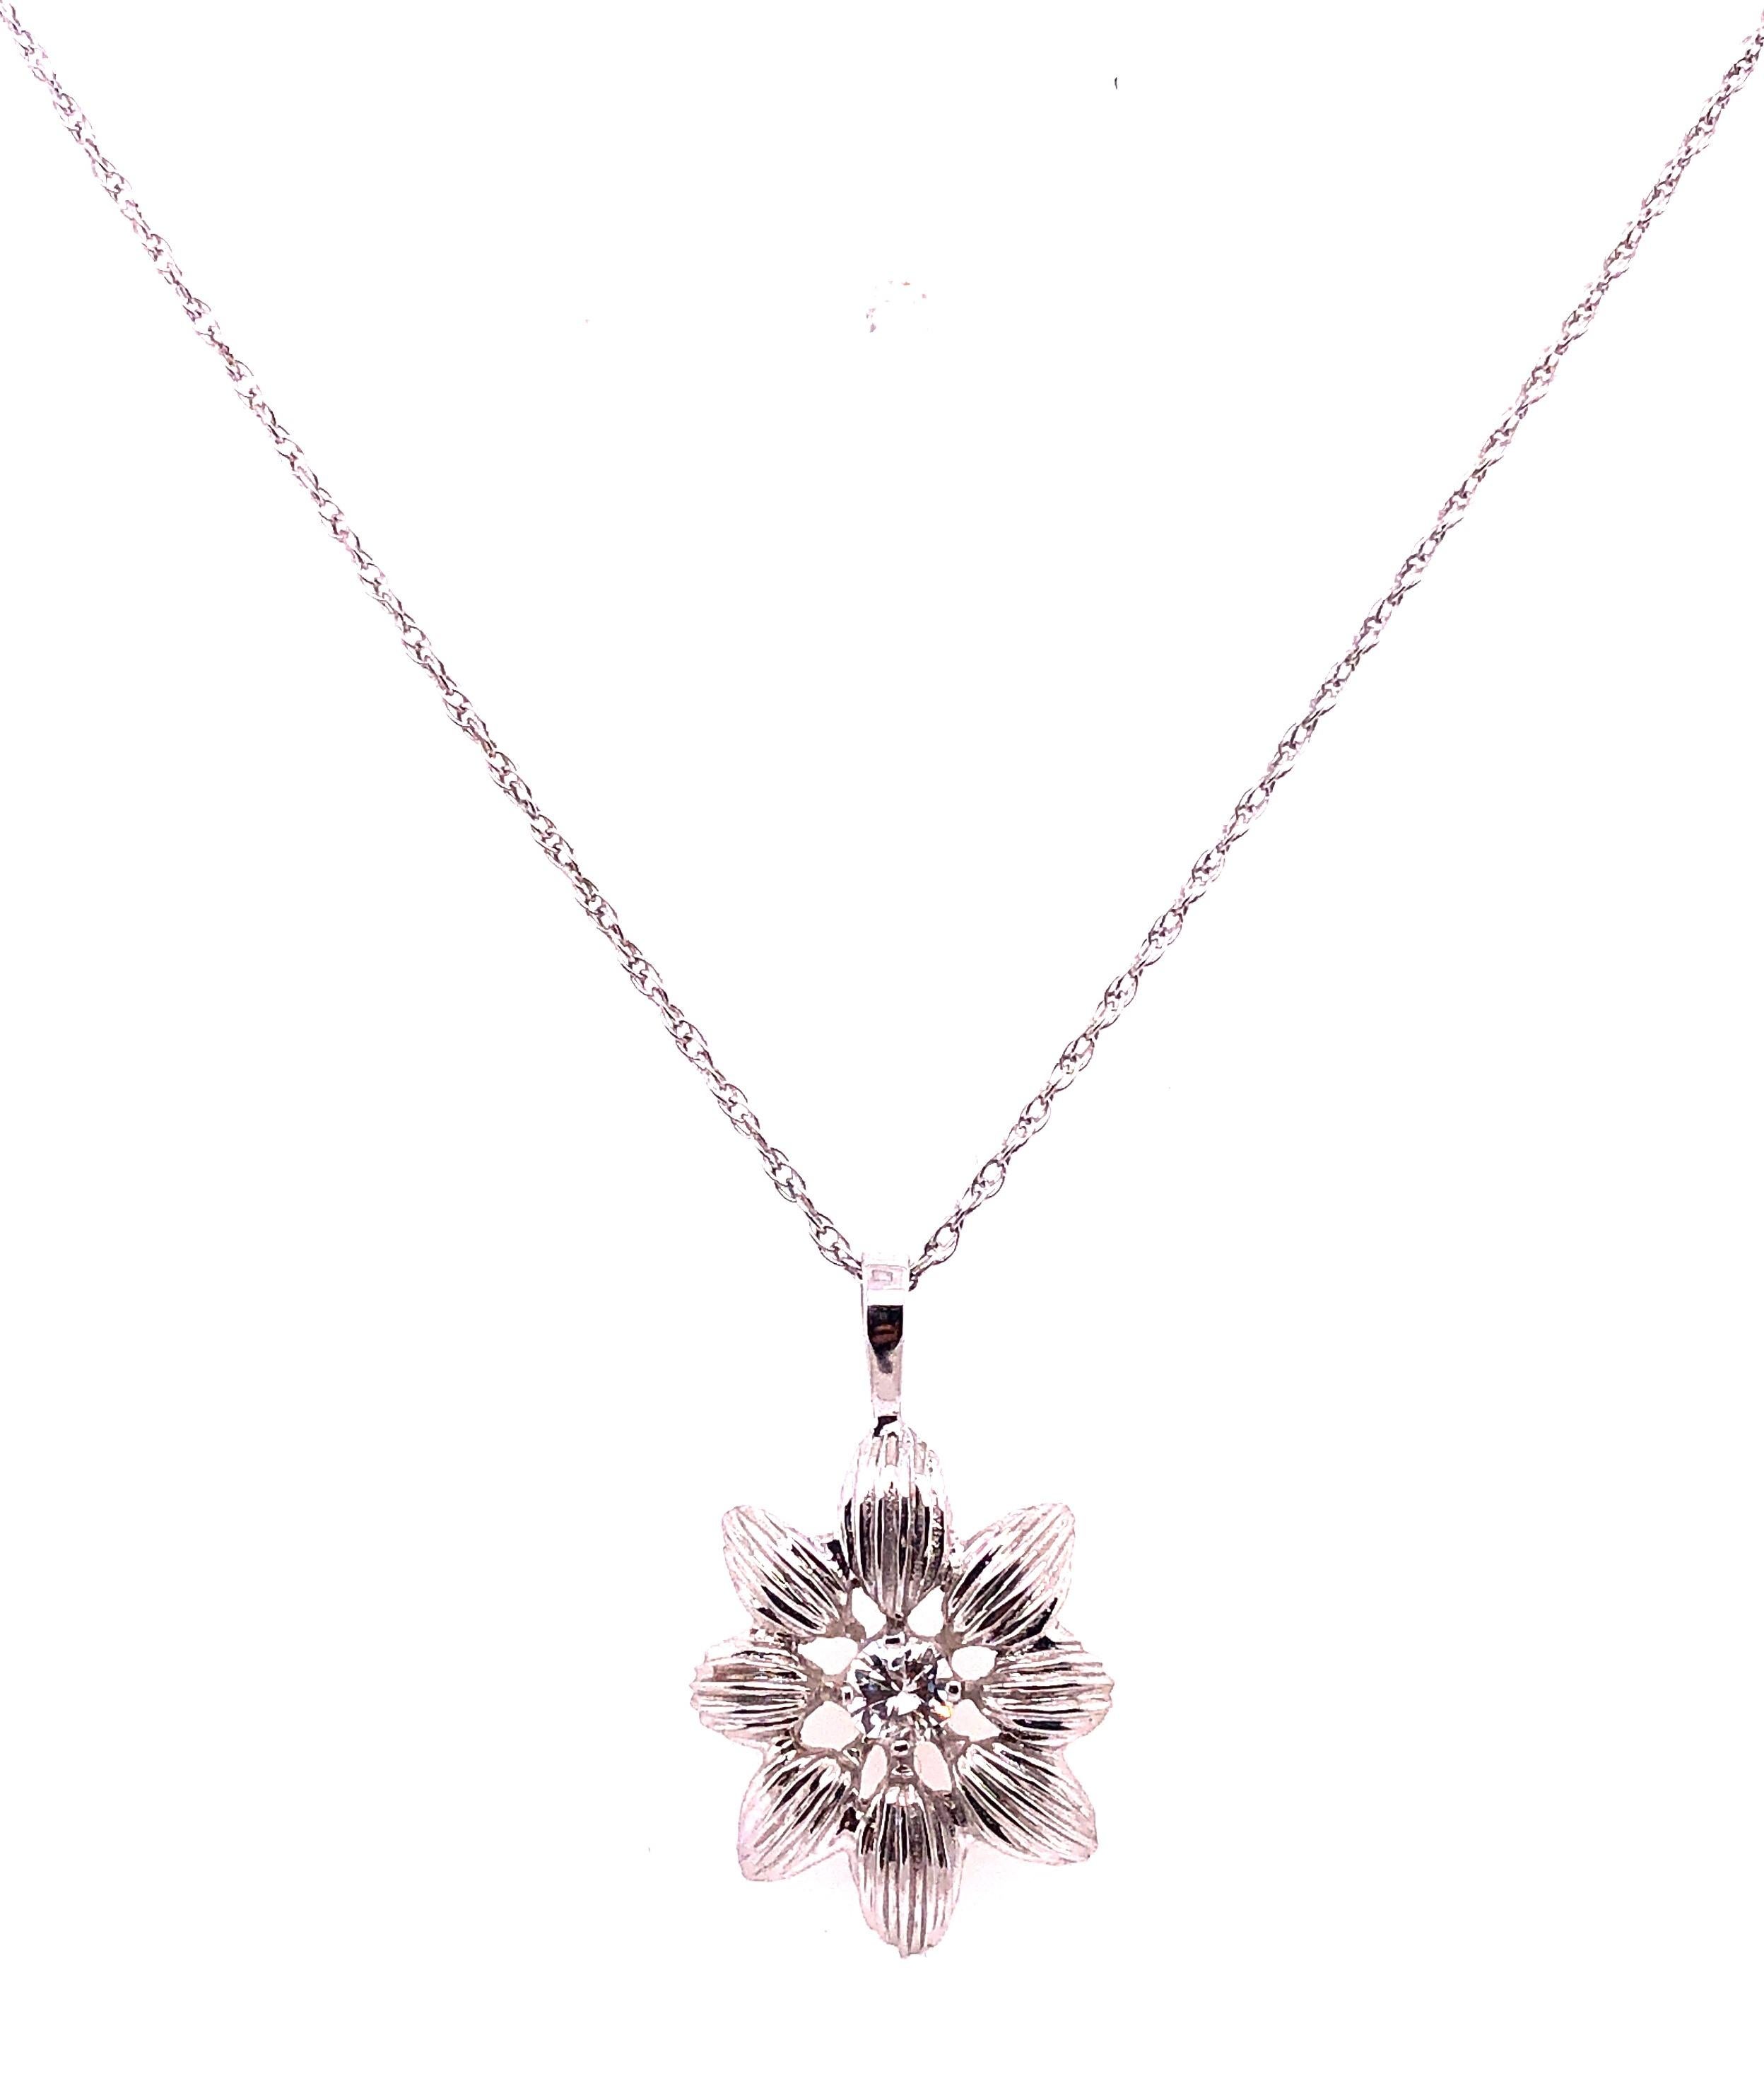 14 Karat White Gold 18 Inch Necklace with Diamond.
0.20 total diamond weight.
3.16 grams total weight.
Pendant and Chain both stamped 14K.